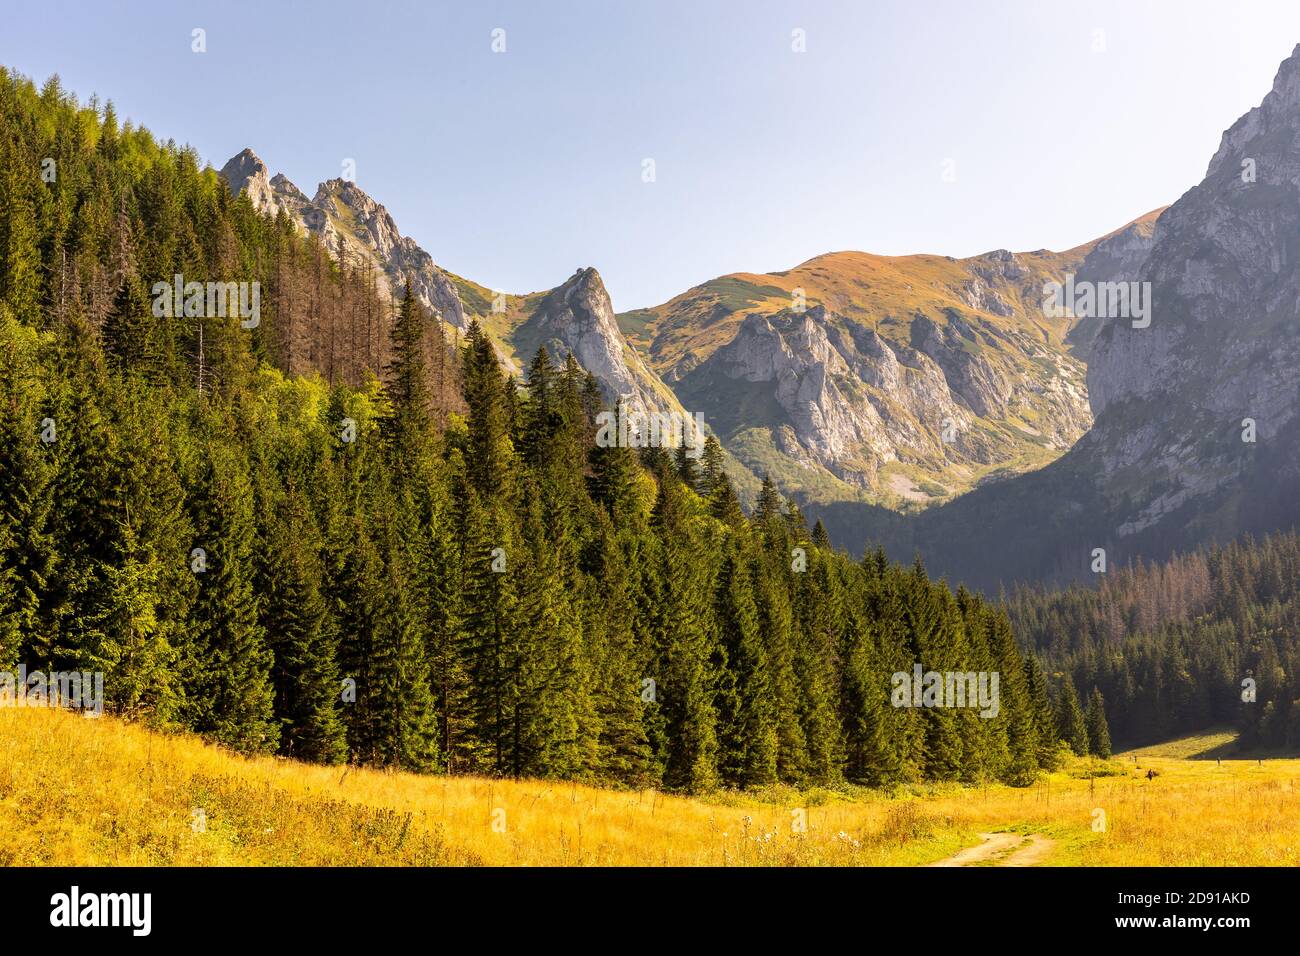 Mountain glade Wielka Polana Malolacka with pine trees and spruces in autumn, with rocky Tatra Mountains in the background, Poland. Giewont, Siodlowa Stock Photo